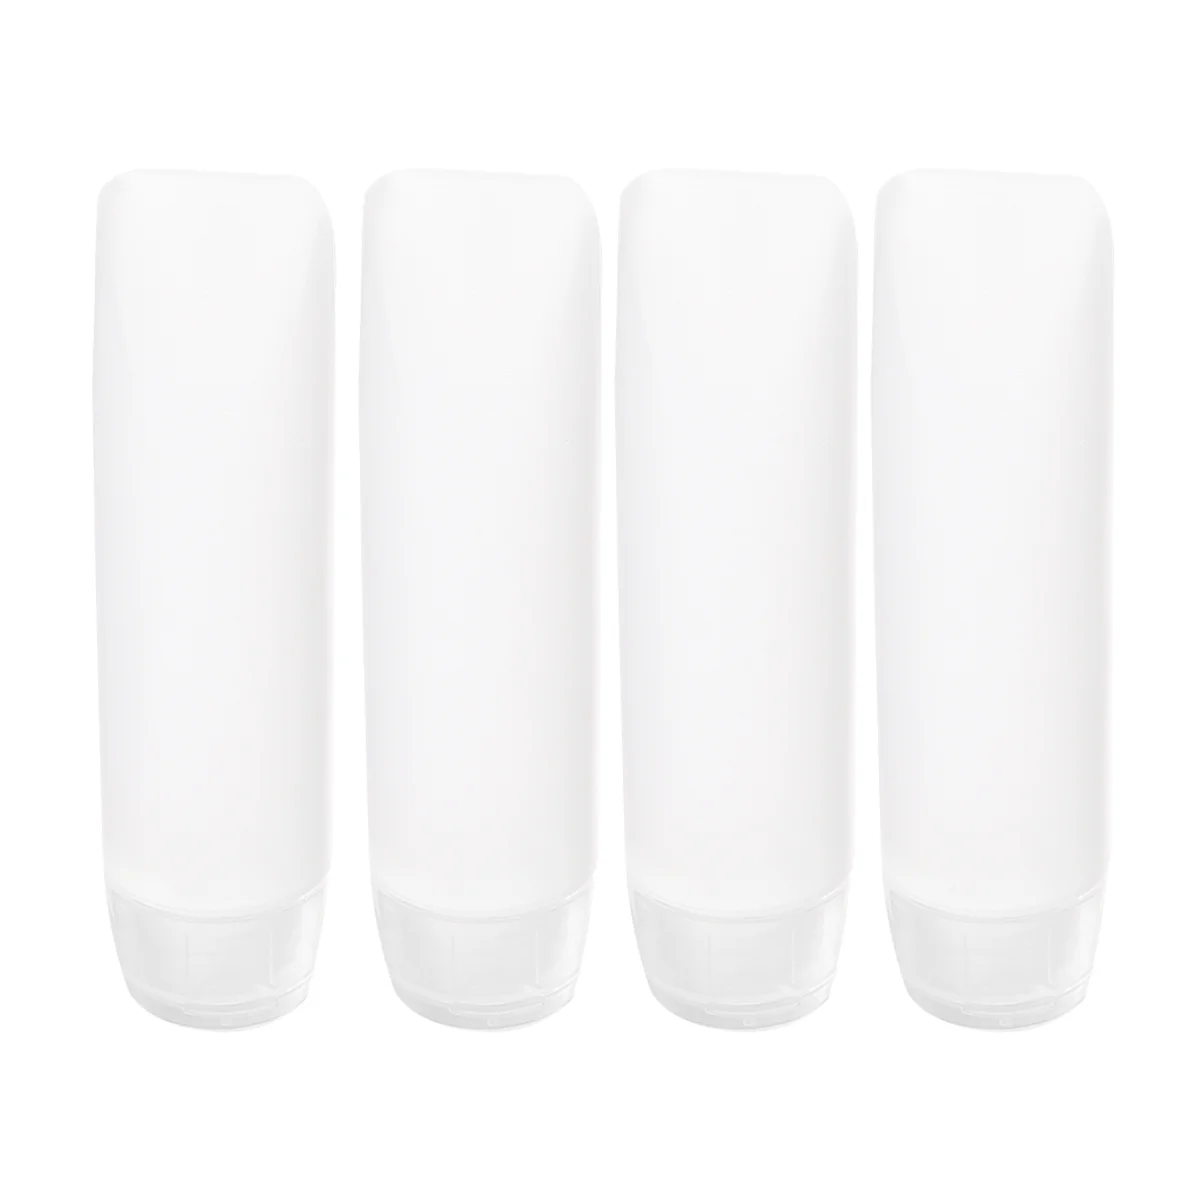 

4PCS Travel Squeeze Tube Makeup Toiletry Refillable Containers For Shampoo Conditioner Lotion Toiletries 30ML